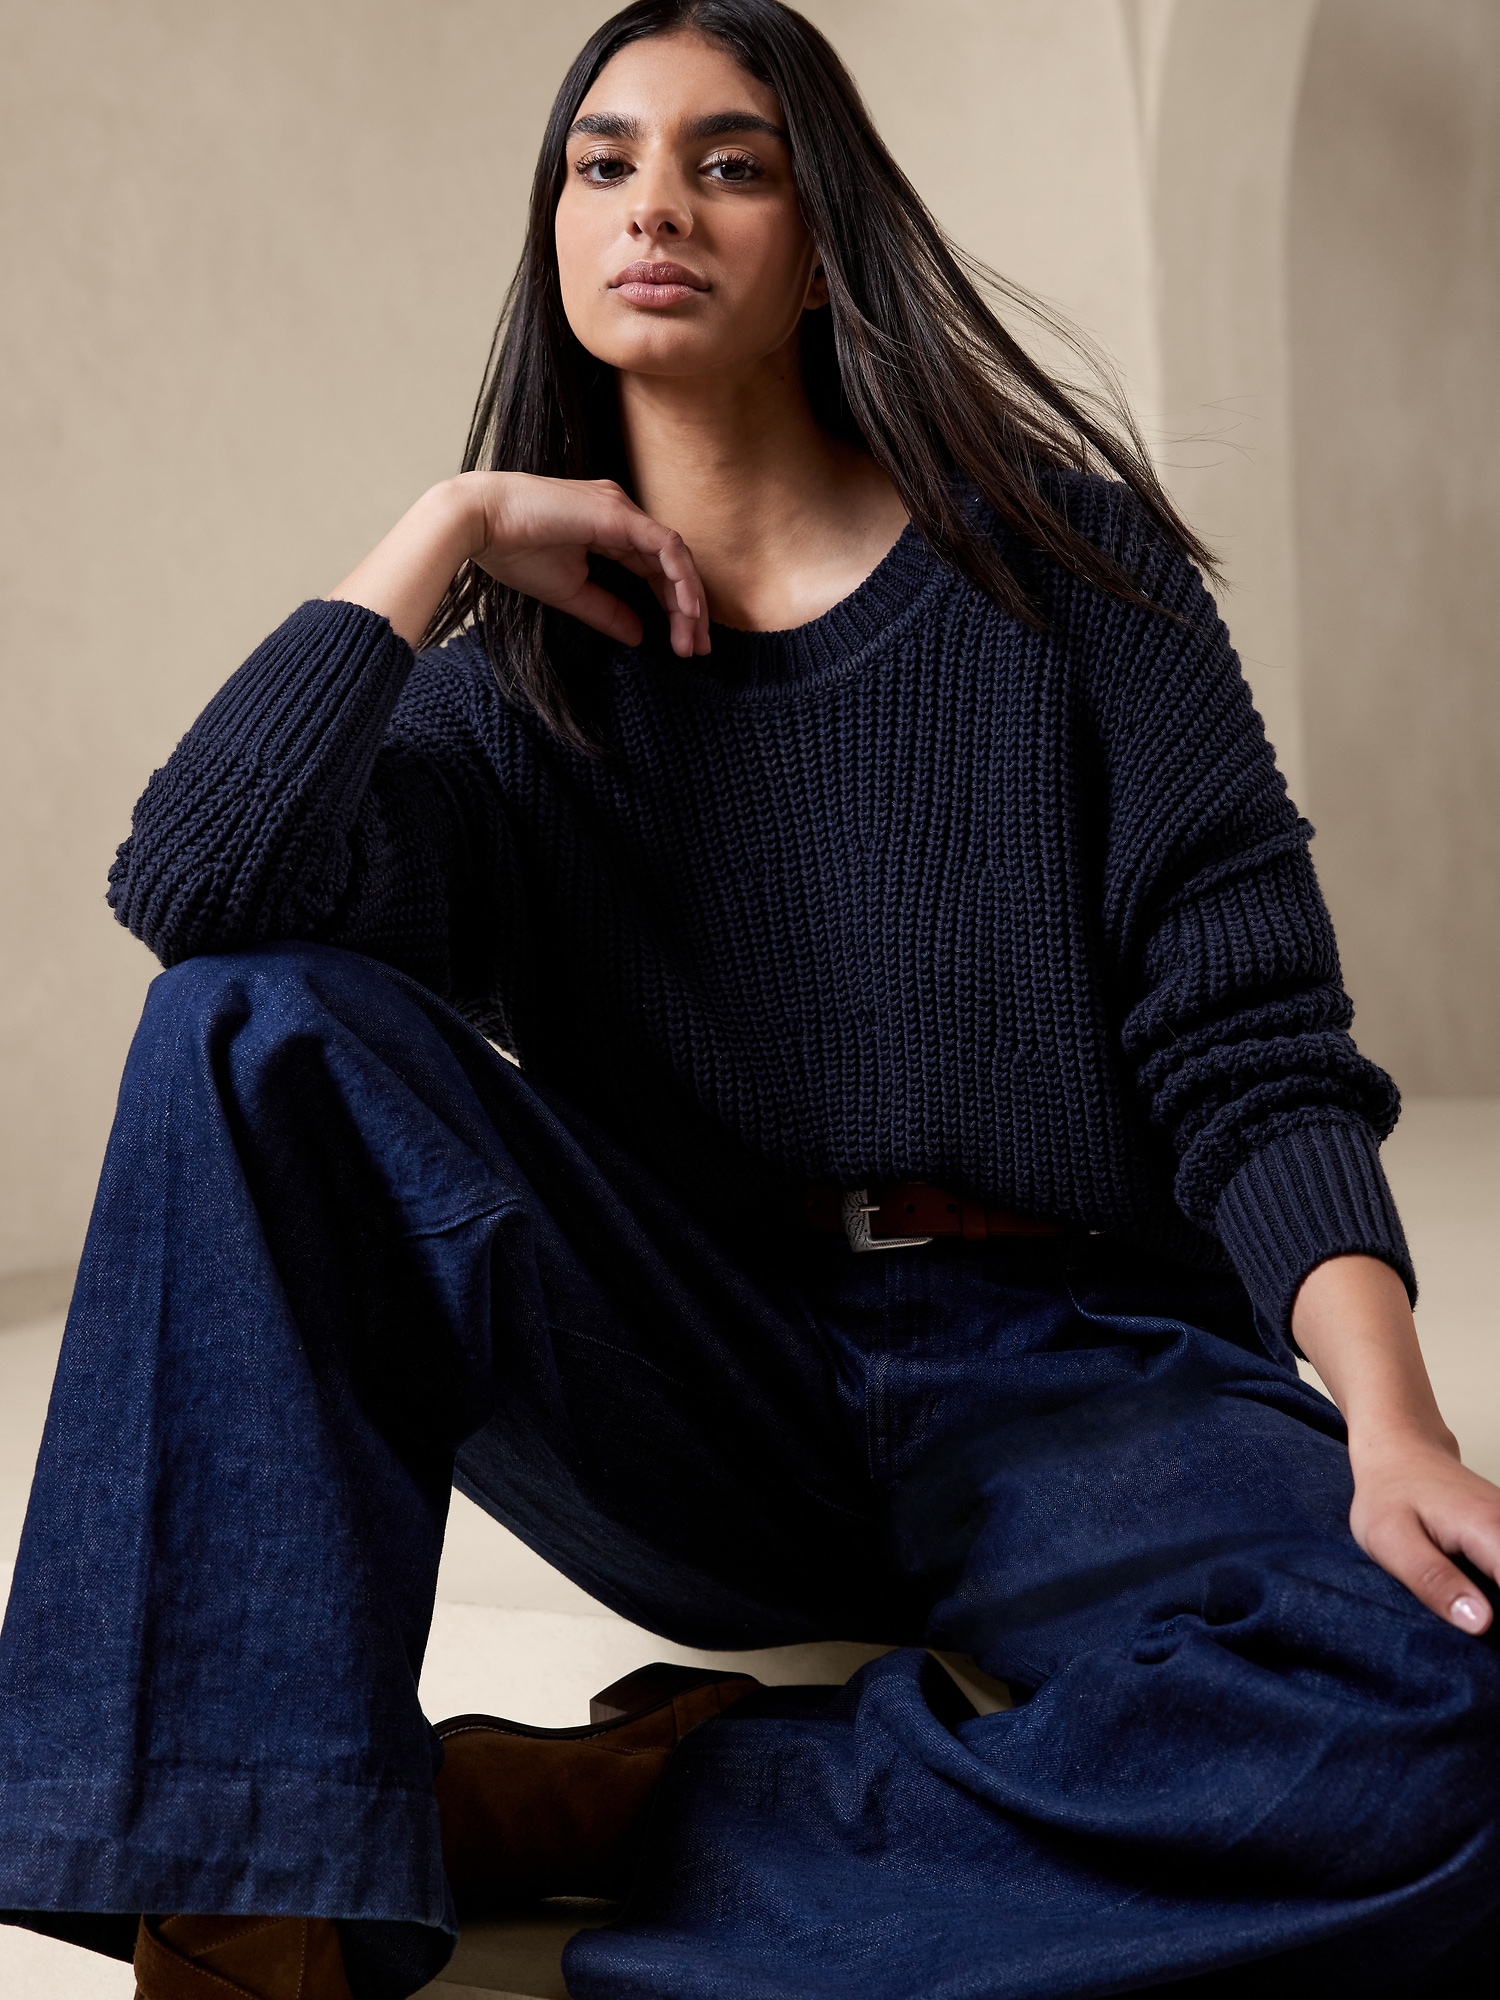 Tiernan Relaxed Chunky Cotton Sweater